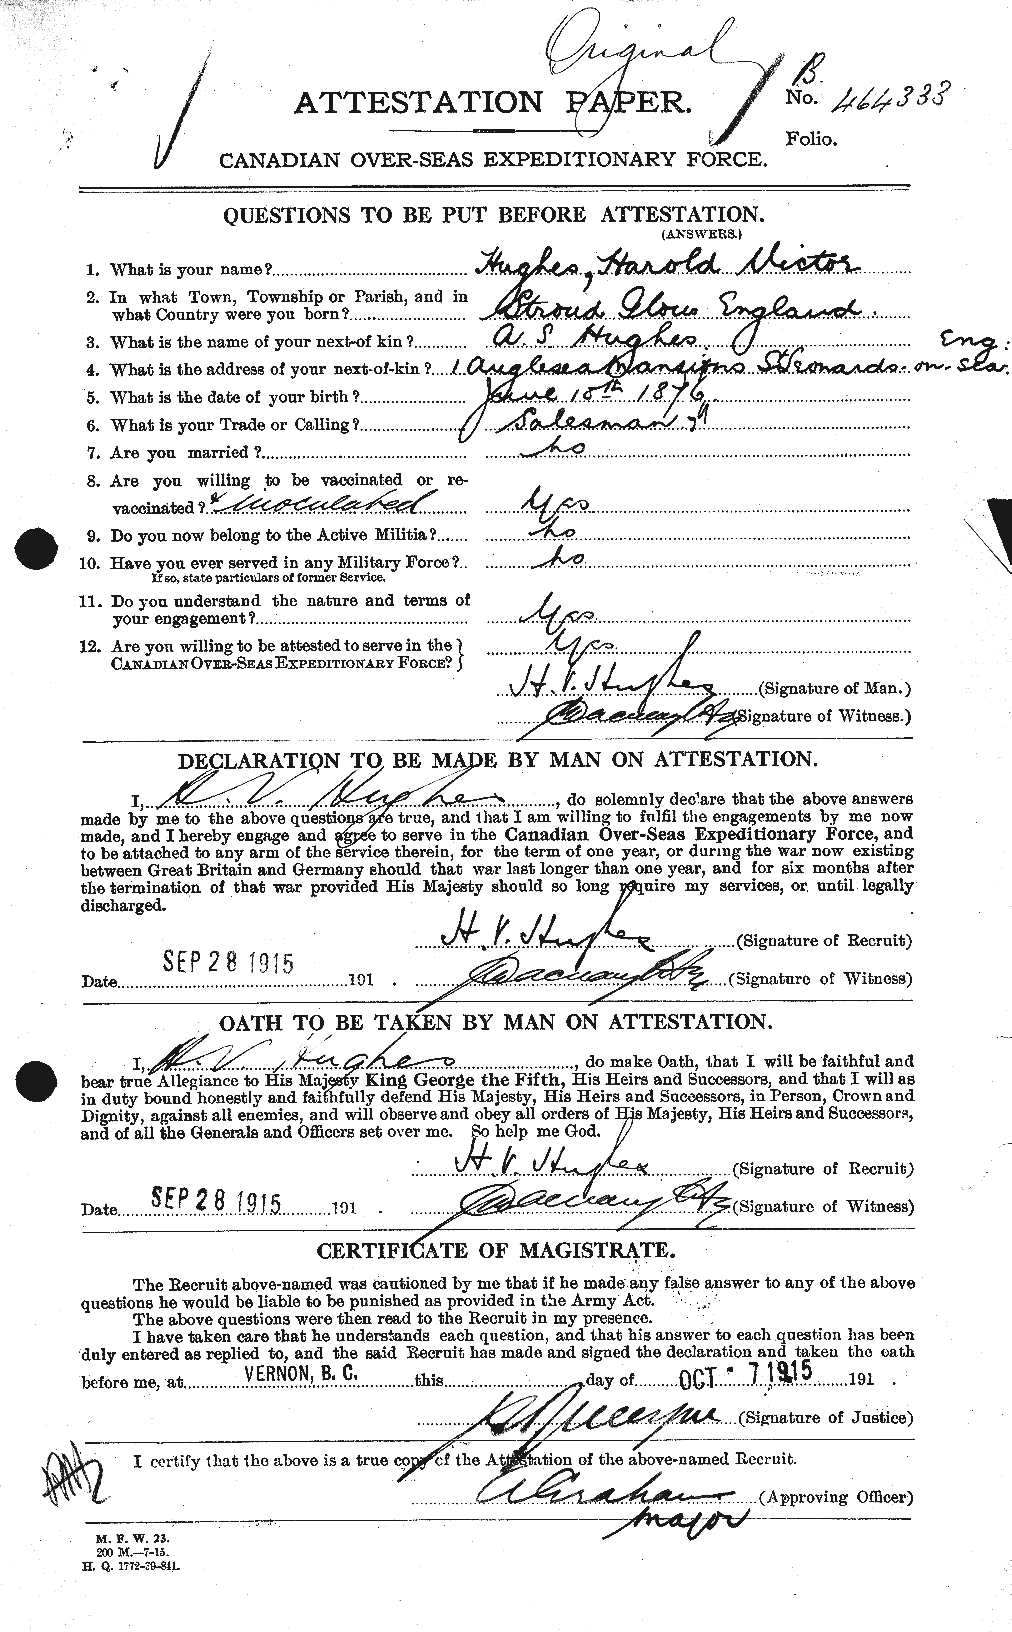 Personnel Records of the First World War - CEF 403861a